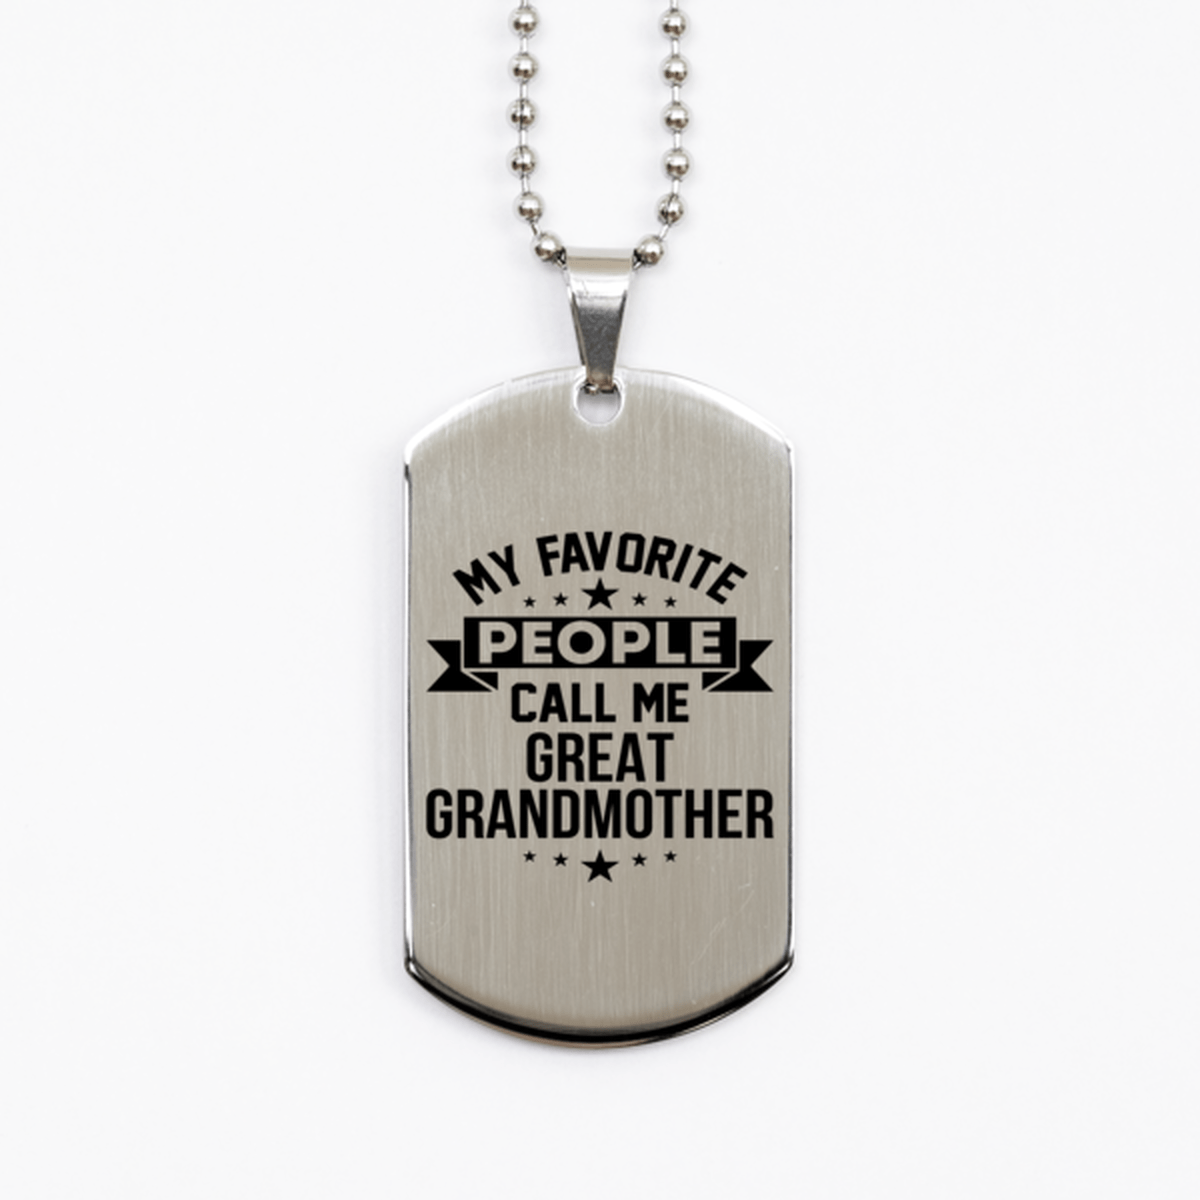 My Favorite People Call Me Great Grandmother, Funny Great Grandmother Silver Dog Tag Necklace, Best Birthday Gifts